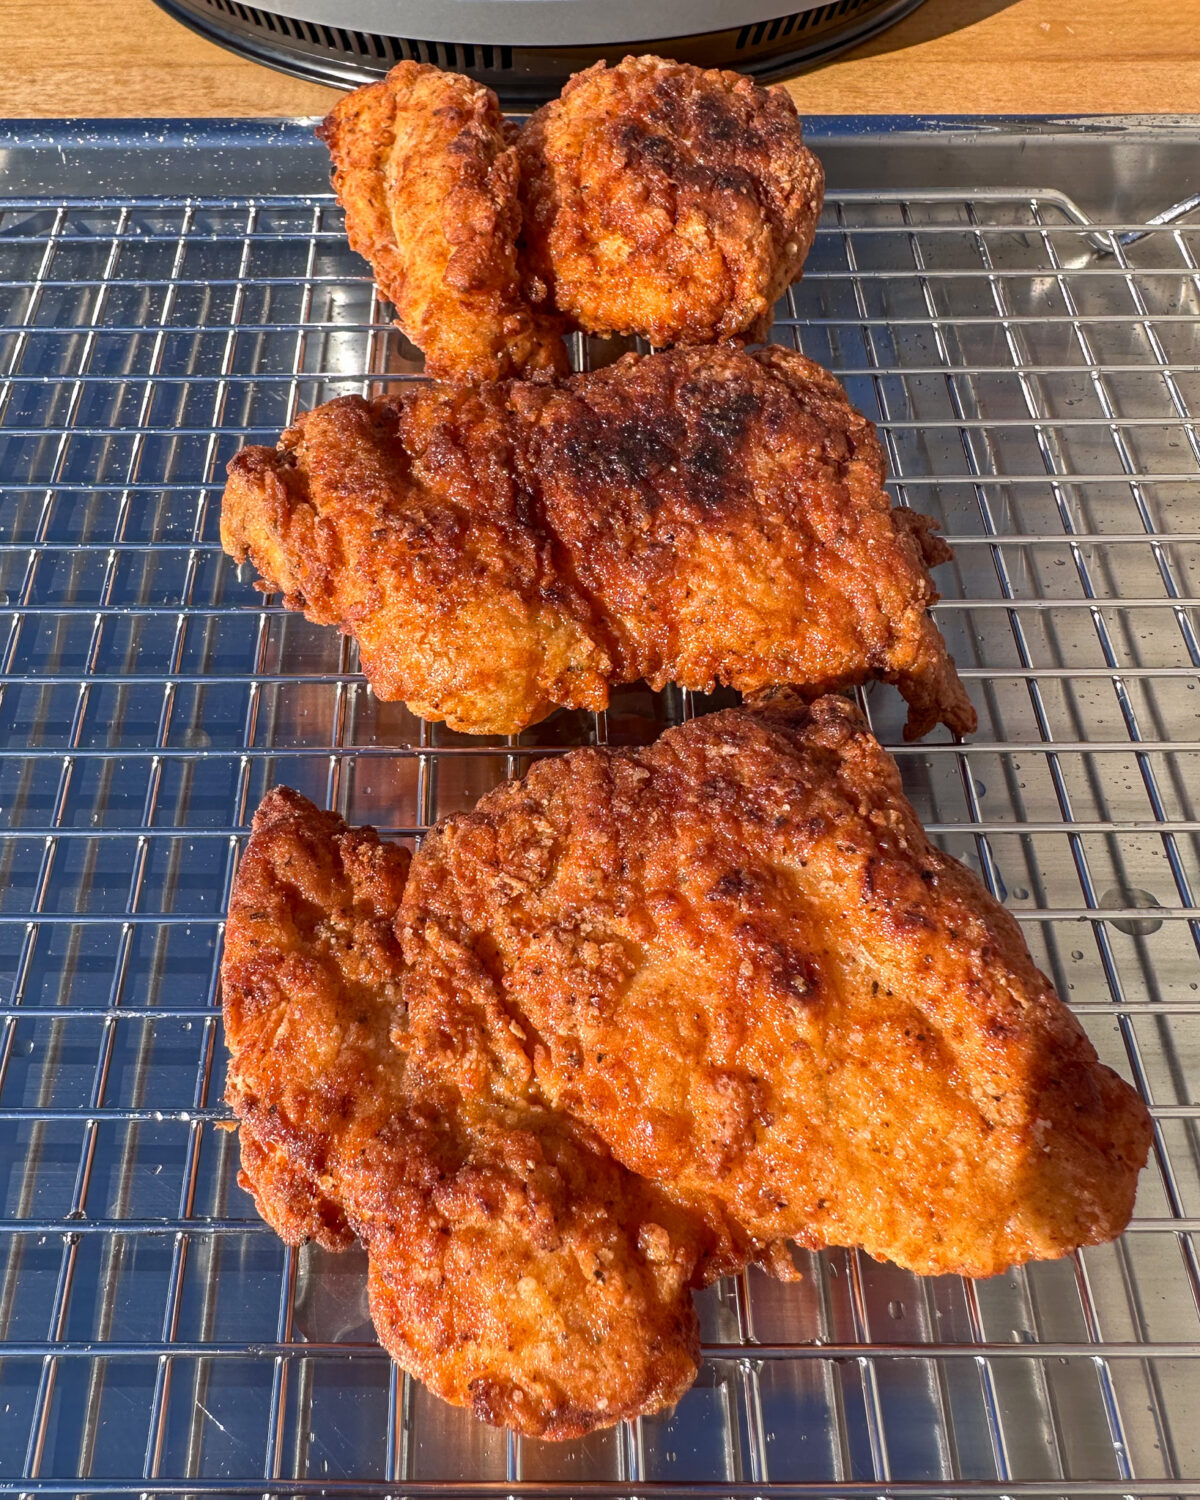 Place fried chicken on rack to drain.